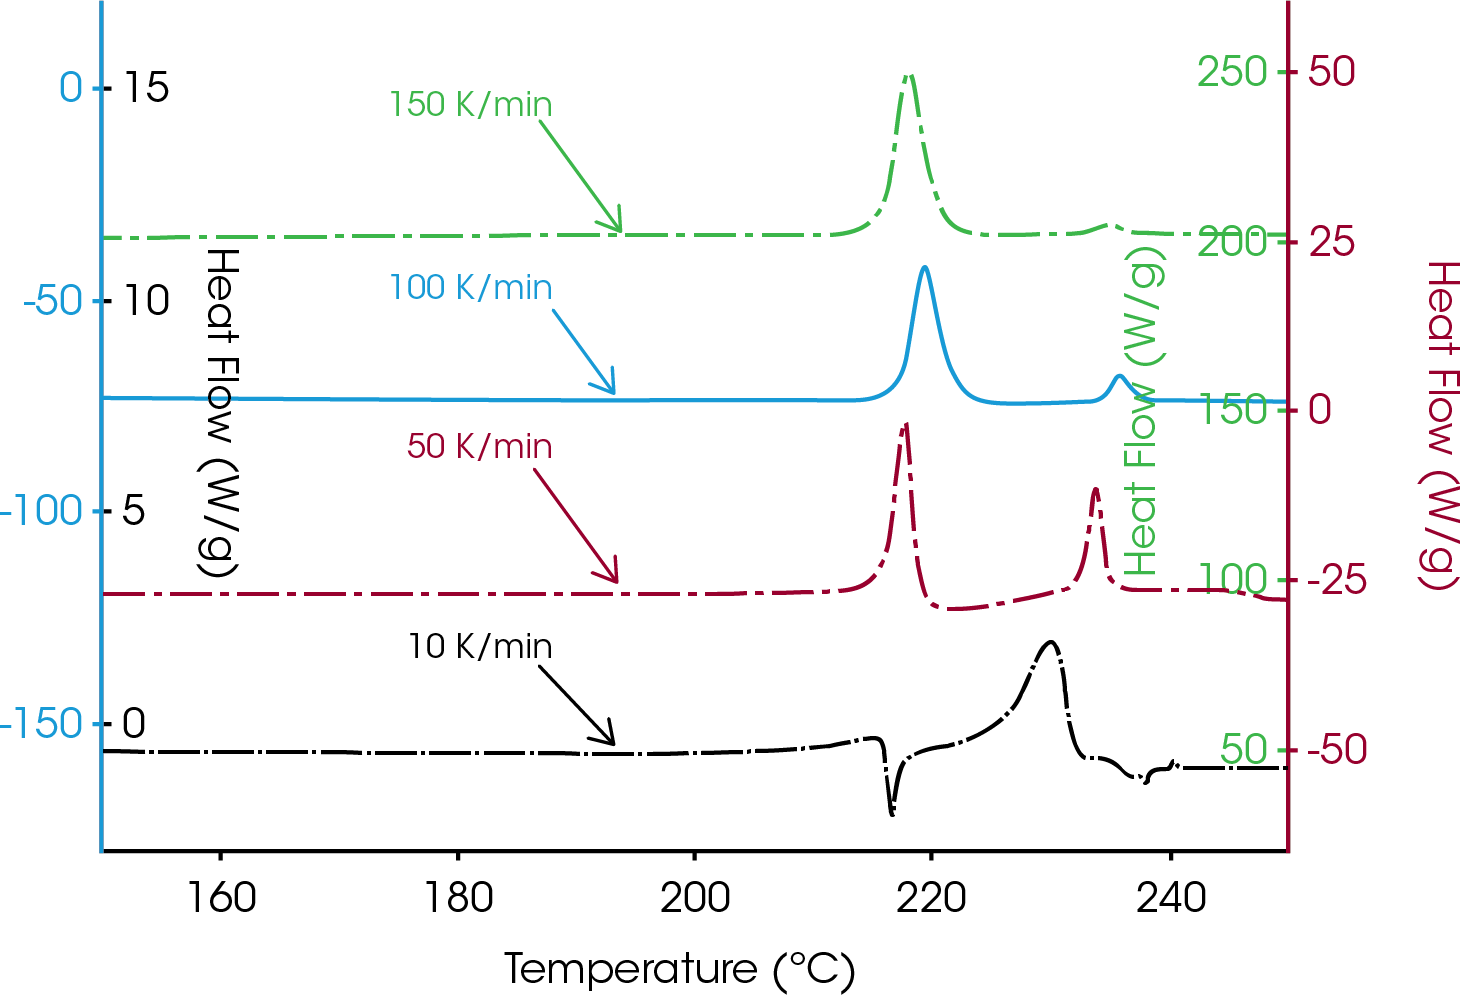 Figure 2. DSC Curve of Anhydrous Dexamethasone Acetate at Different Heating Rates